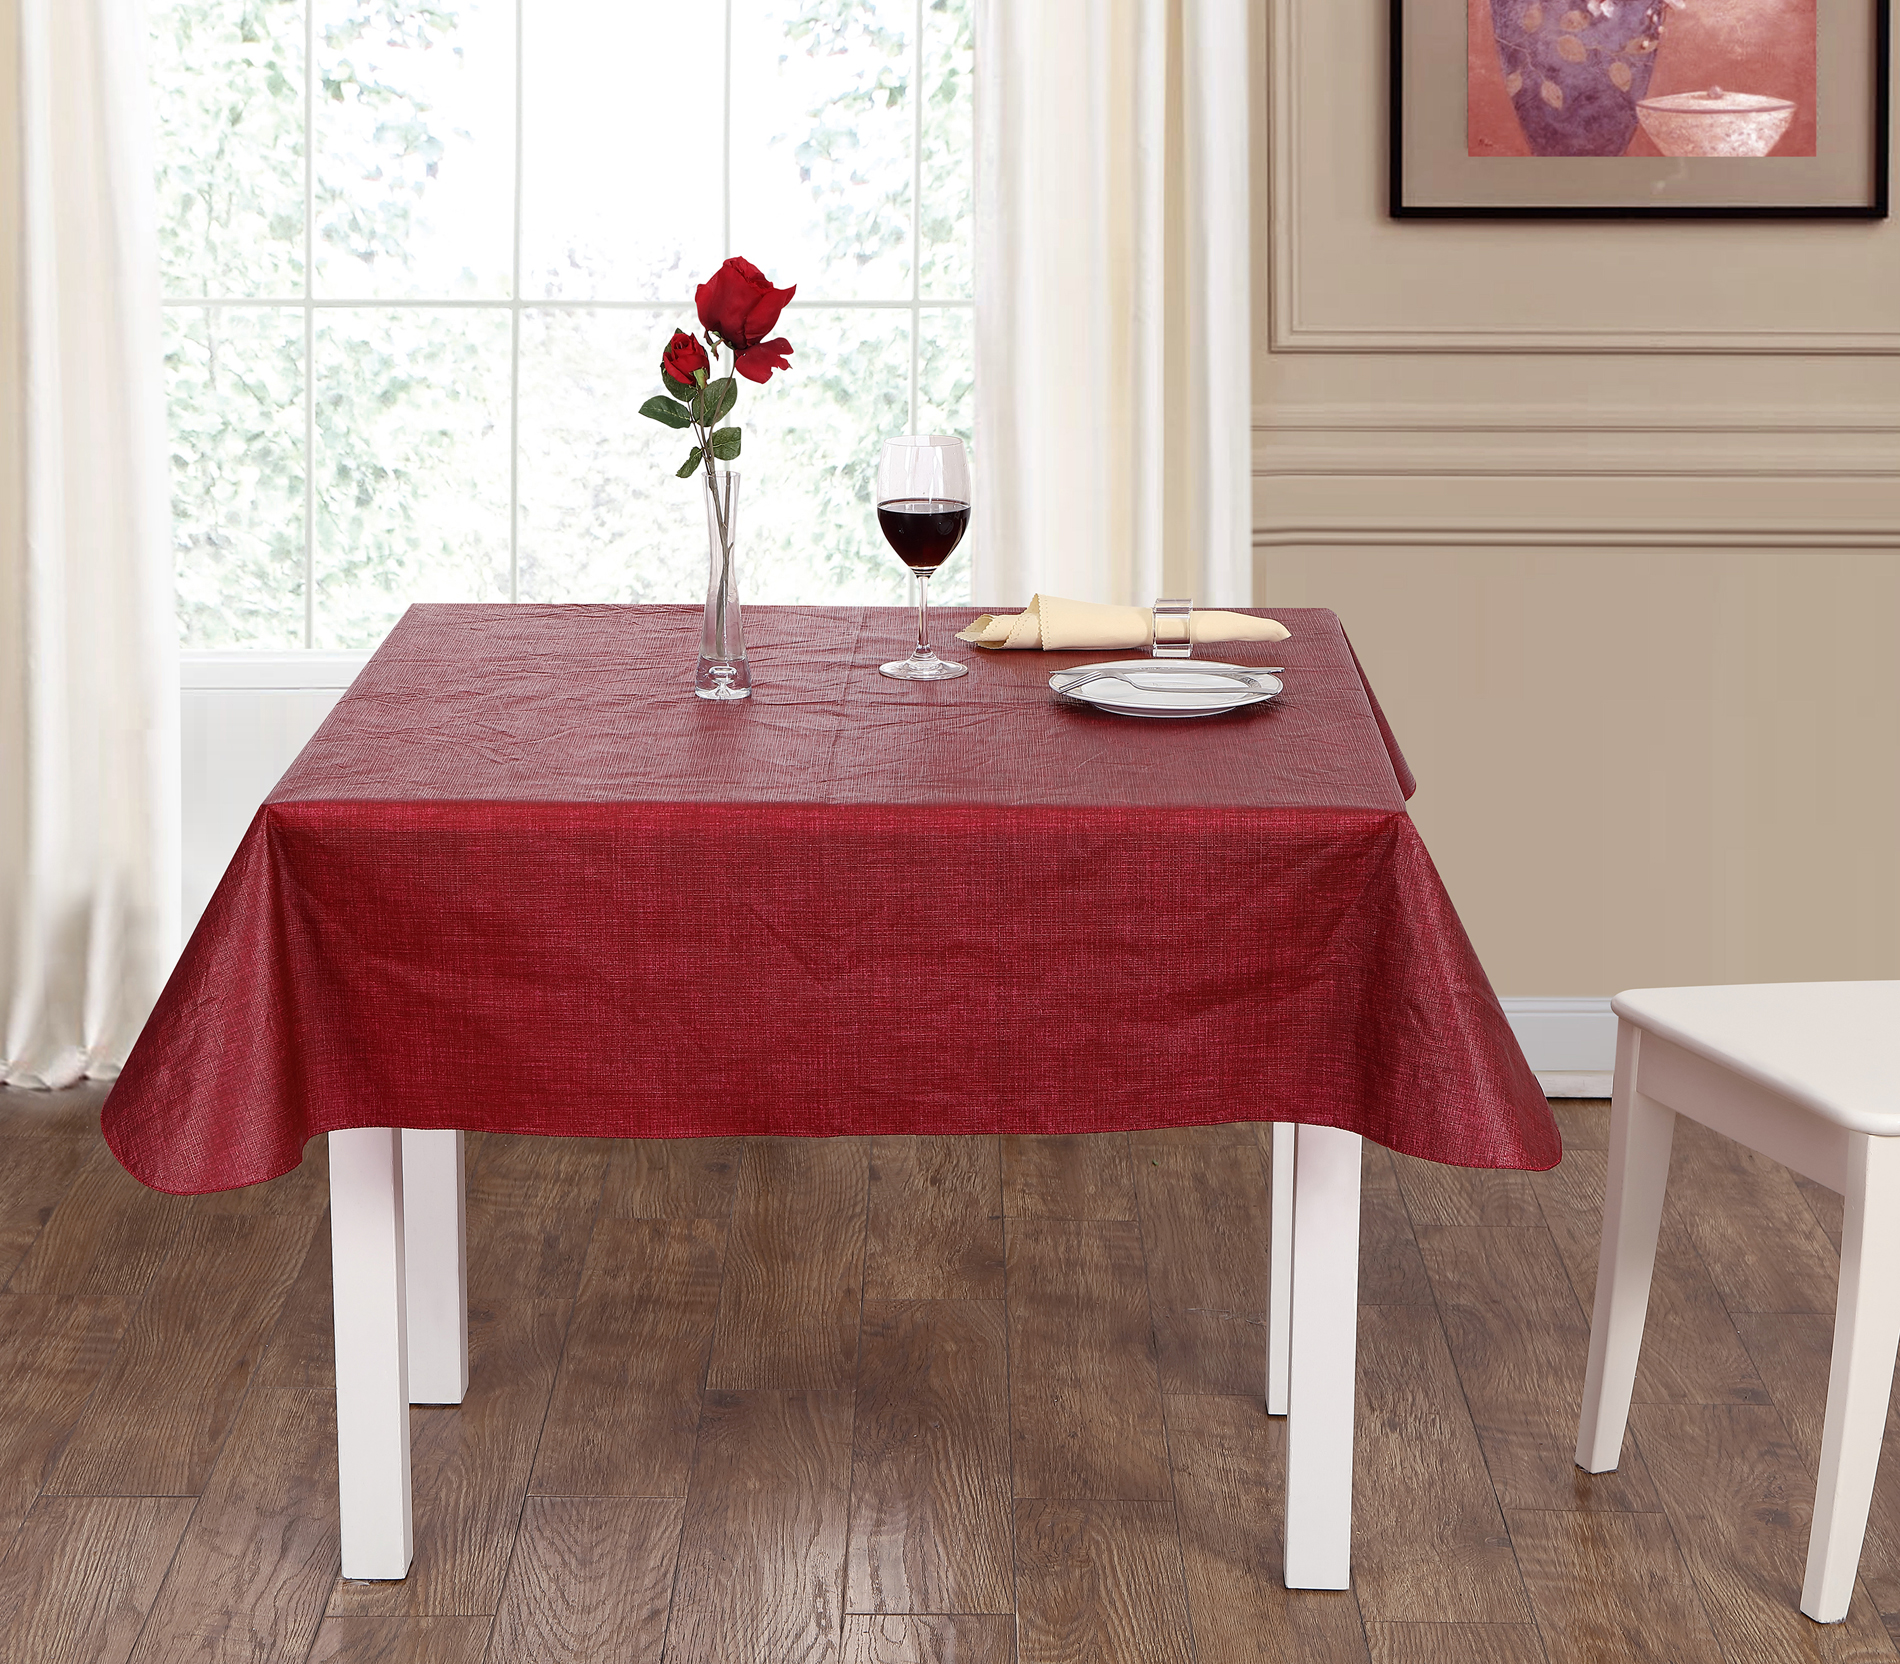 Essential Home 52 x 52" PEVA Solid Tablecloth